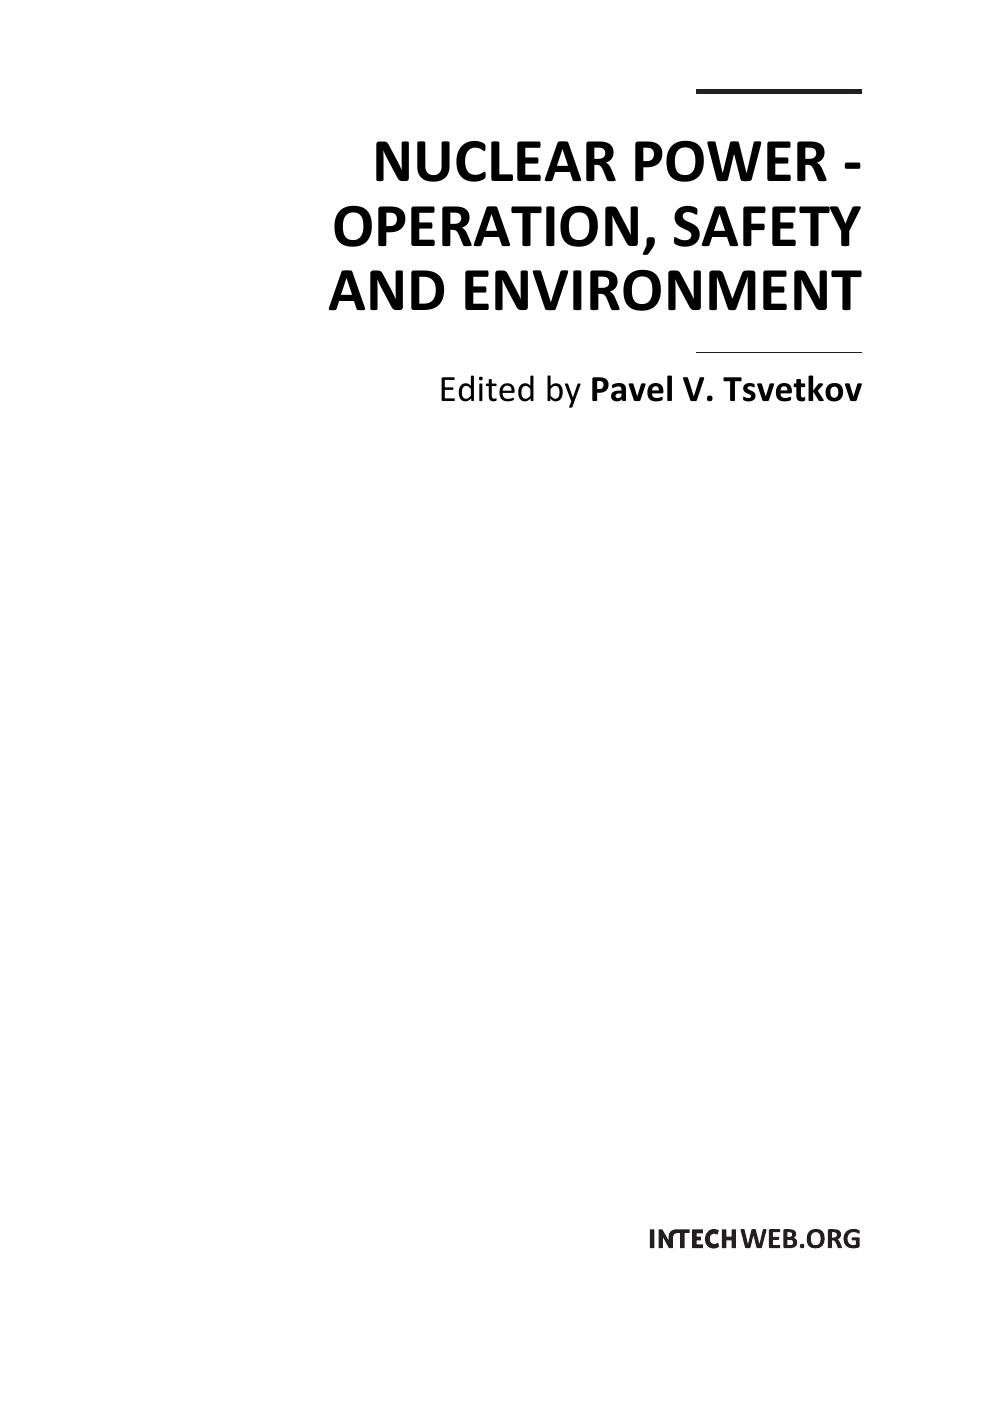 Microsoft Word - preface_Nuclear Power - Operation, Safety and Environment